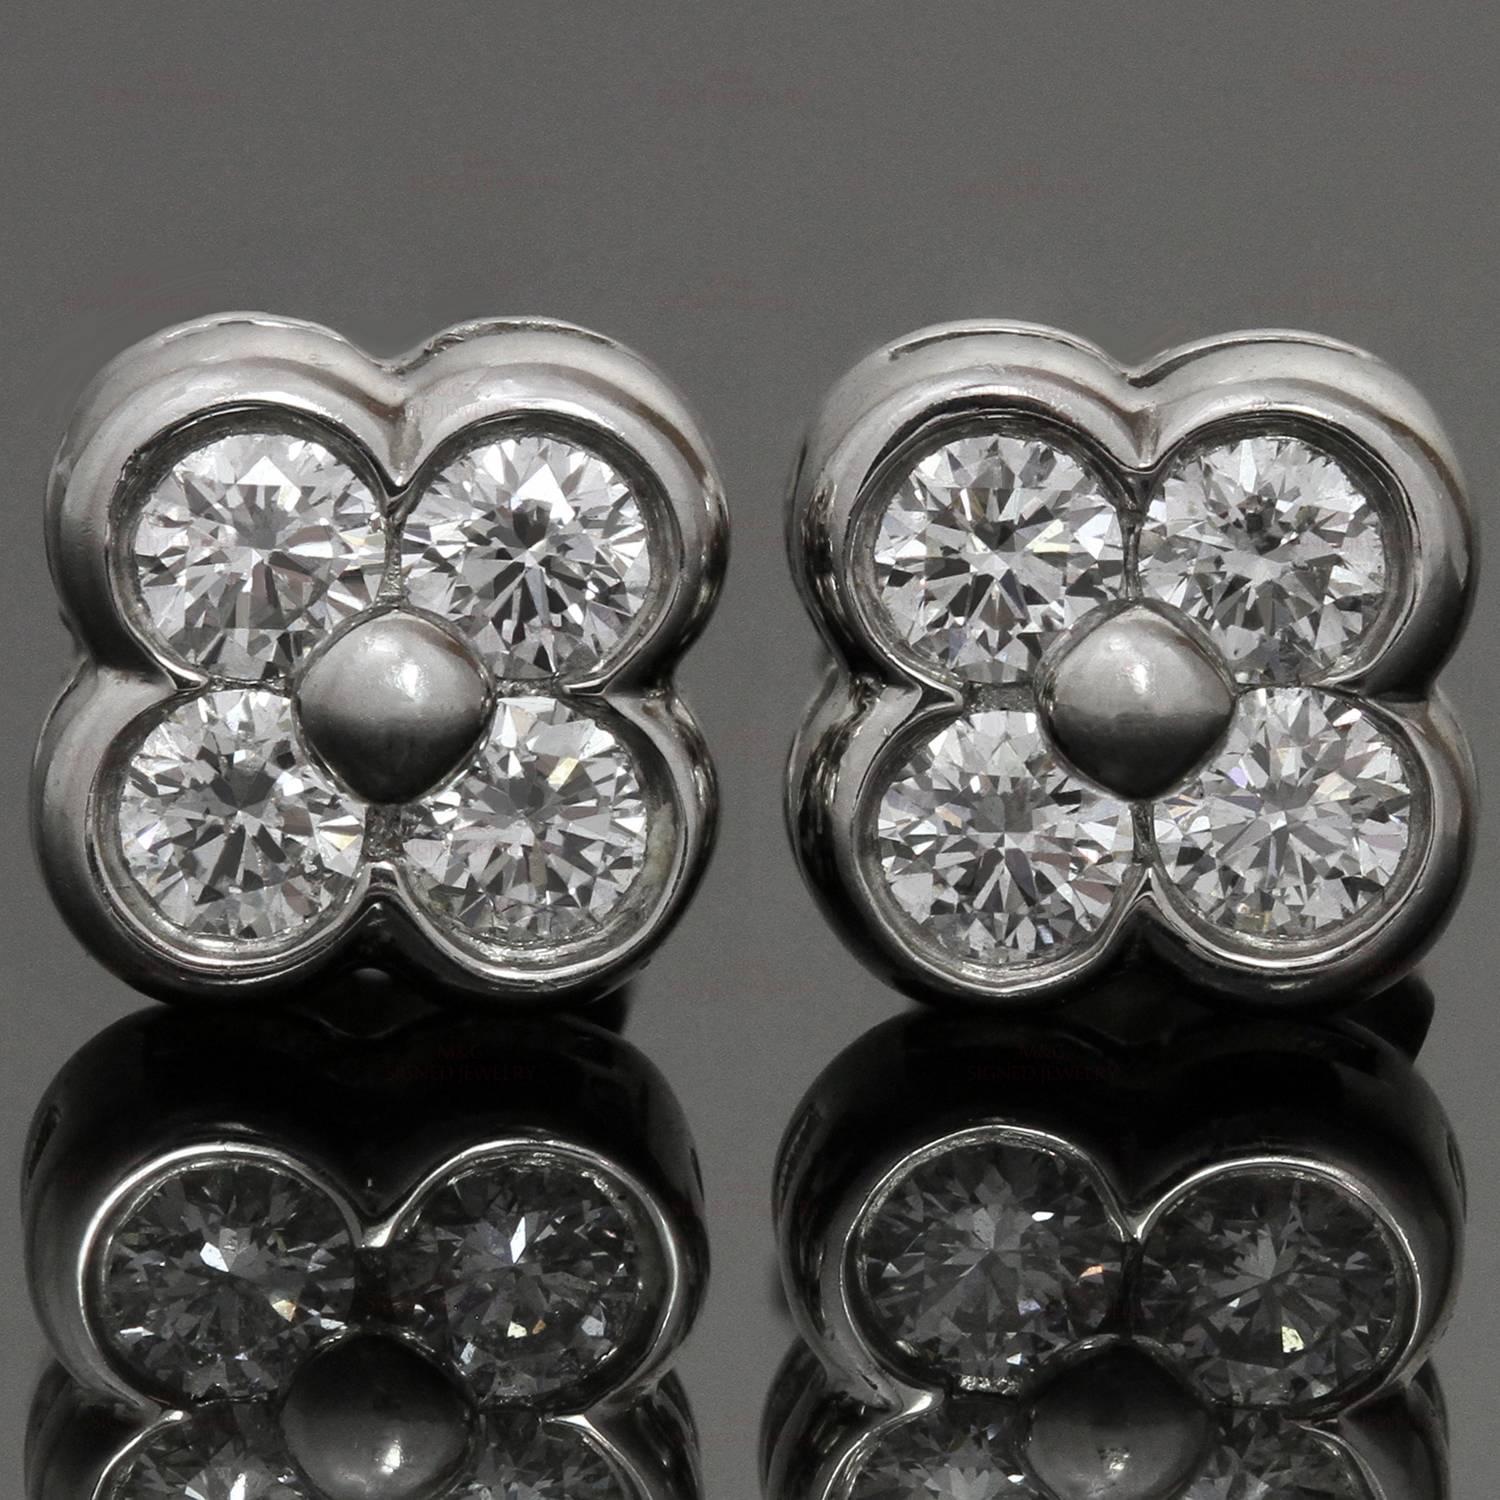 These exquisite Tiffany & Co. flower-shaped stud earrings are crafted in platinum and bezel-set with brilliant-cut round E-F VVS1-VVS2 diamonds of an estimated 0.58 carats. Made in United States circa 2000s. Classic and timeless.  Measurements: